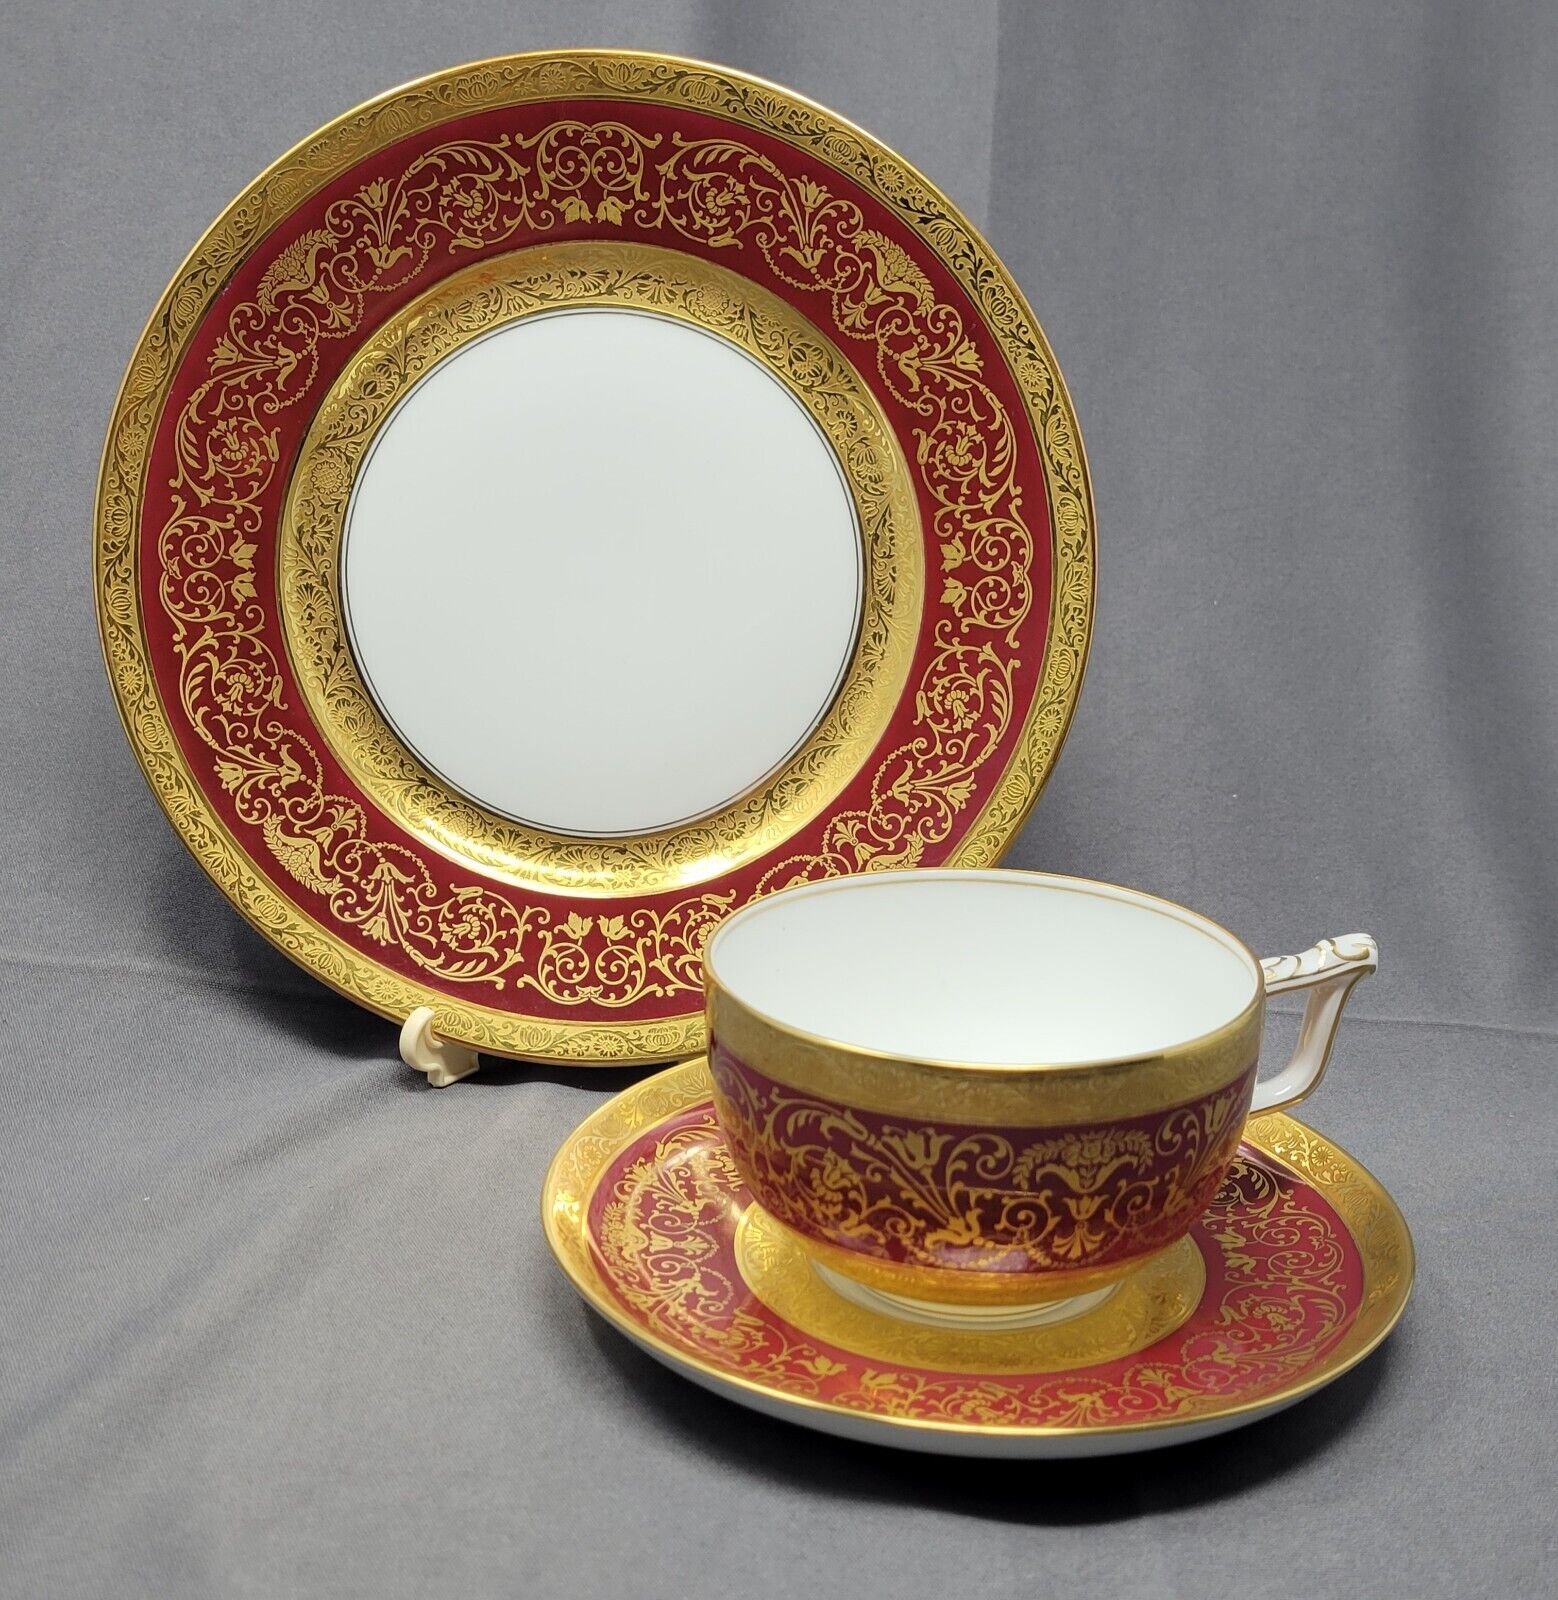 Rosenthal Selb Bavaria Gold Encrusted  Red Trio Cup and Saucer C. 1930